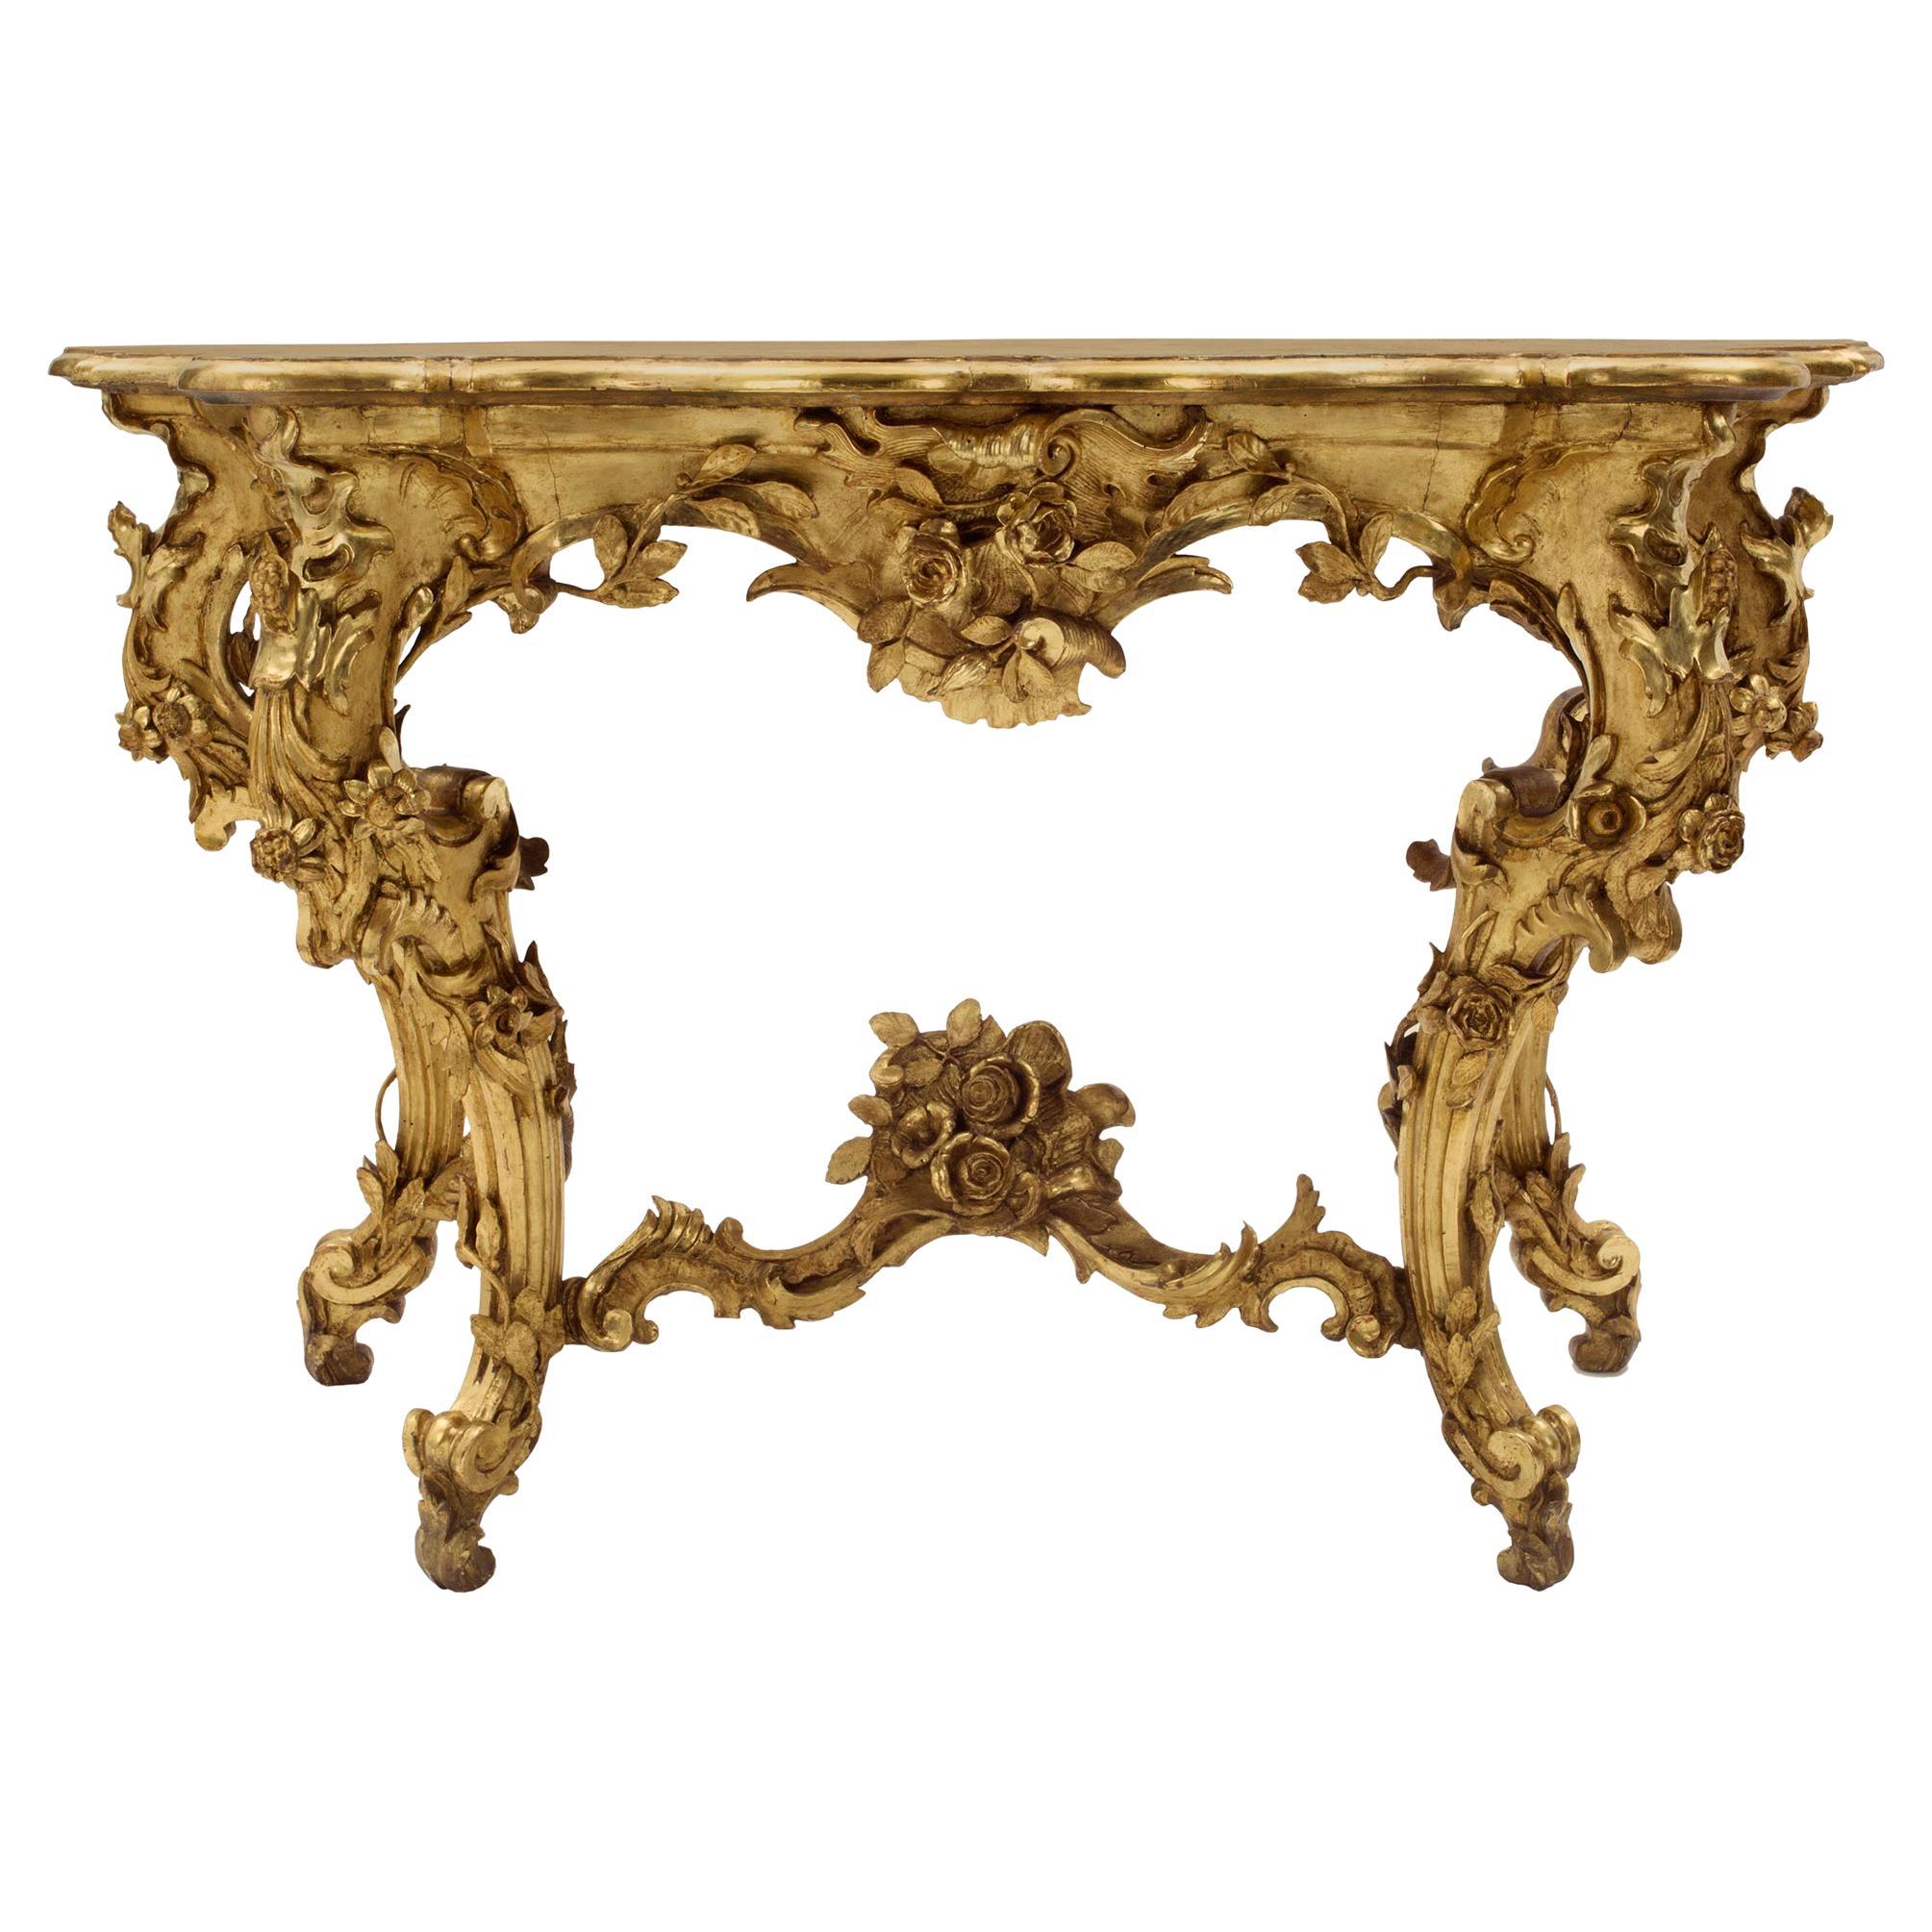 Italian 19th Century Louis XV Style Finely Carved Giltwood Freestanding Console